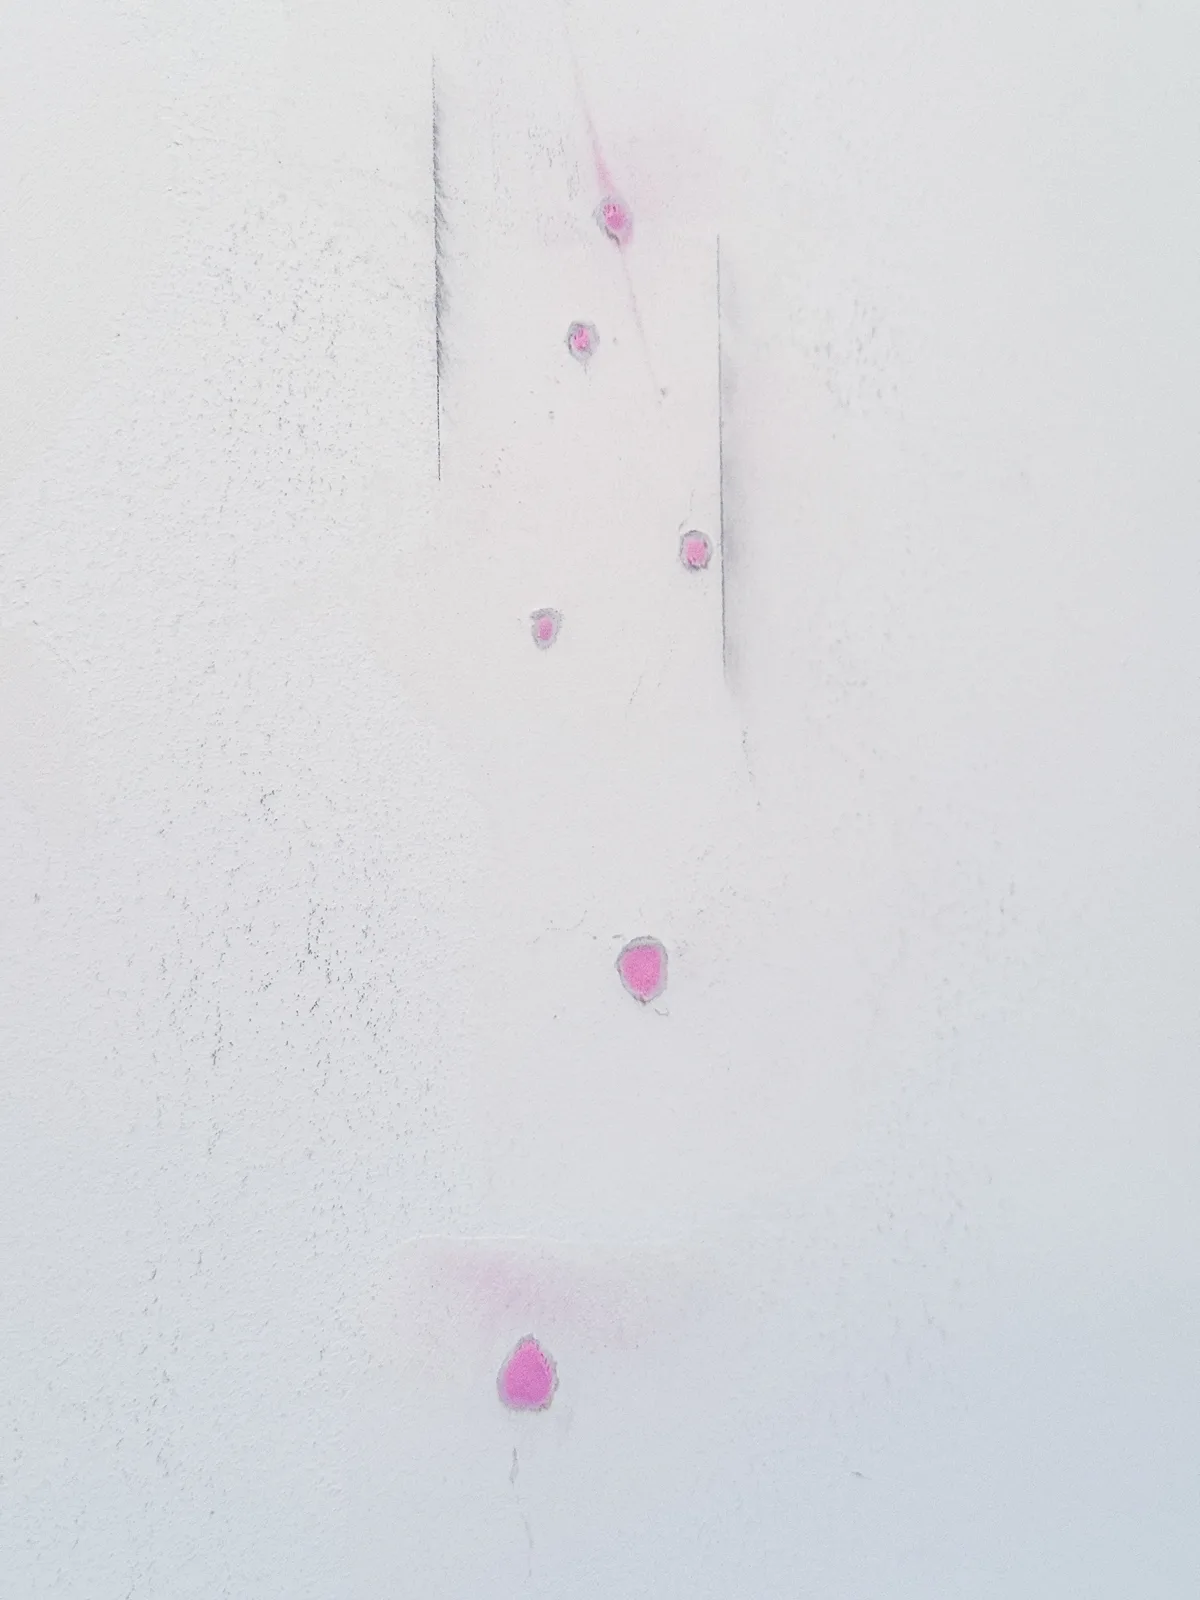 drywall anchor holes filled with spackle that changes from pink to white when dry